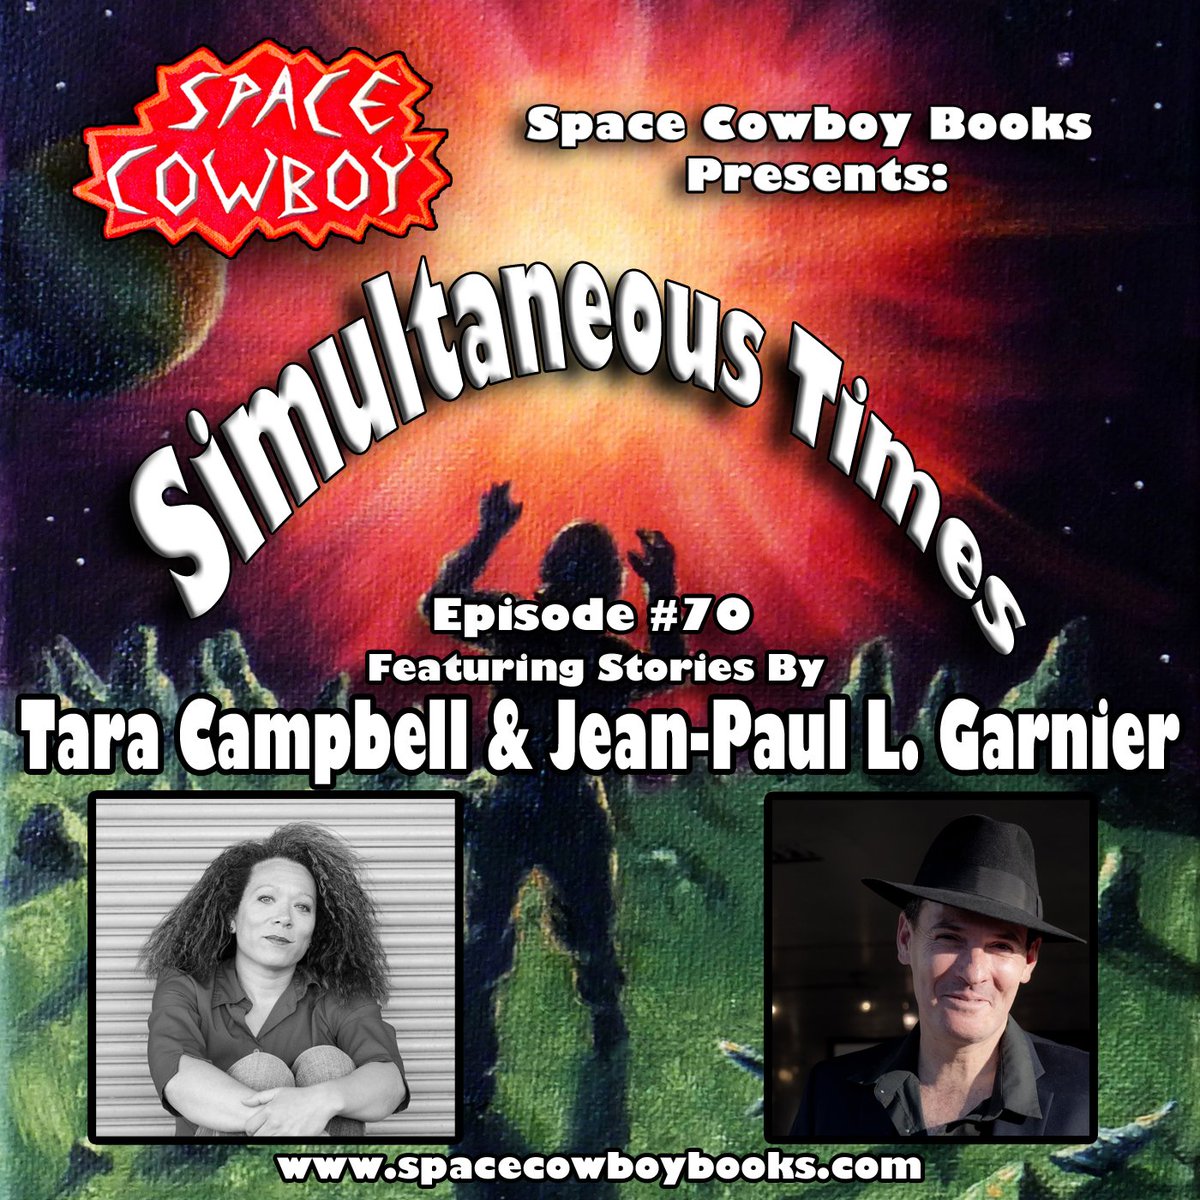 Simultaneous Times Ep.70 is live! Featuring stories by Tara Campbell & Jean-Paul L. Garnier with music by Phog Masheeen & Fall Precauxions. Find it on your favorite podcast players or at podomatic.com/podcasts/space…